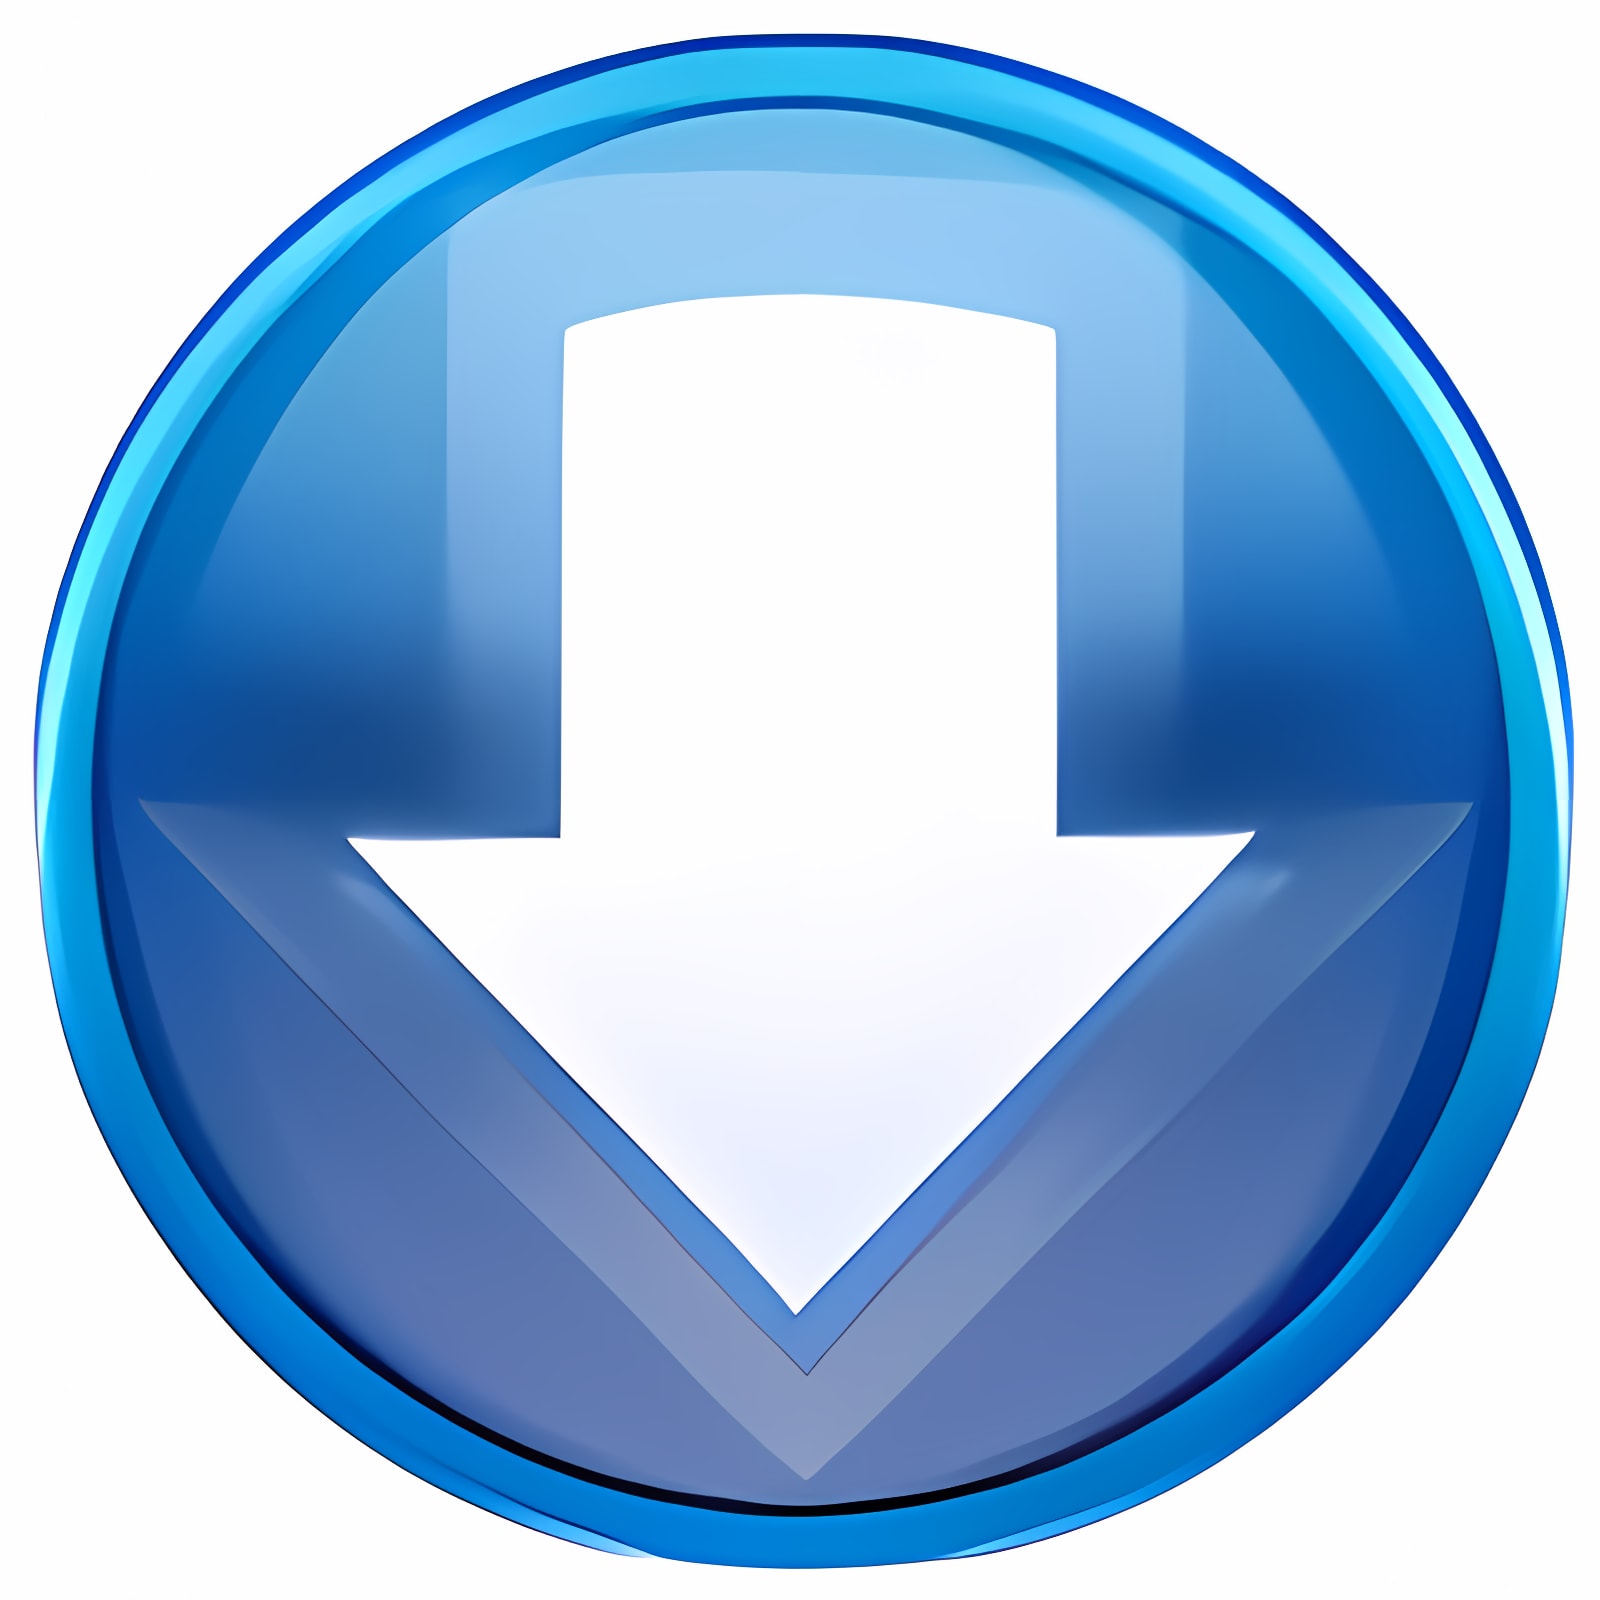 microsoft download manager download free